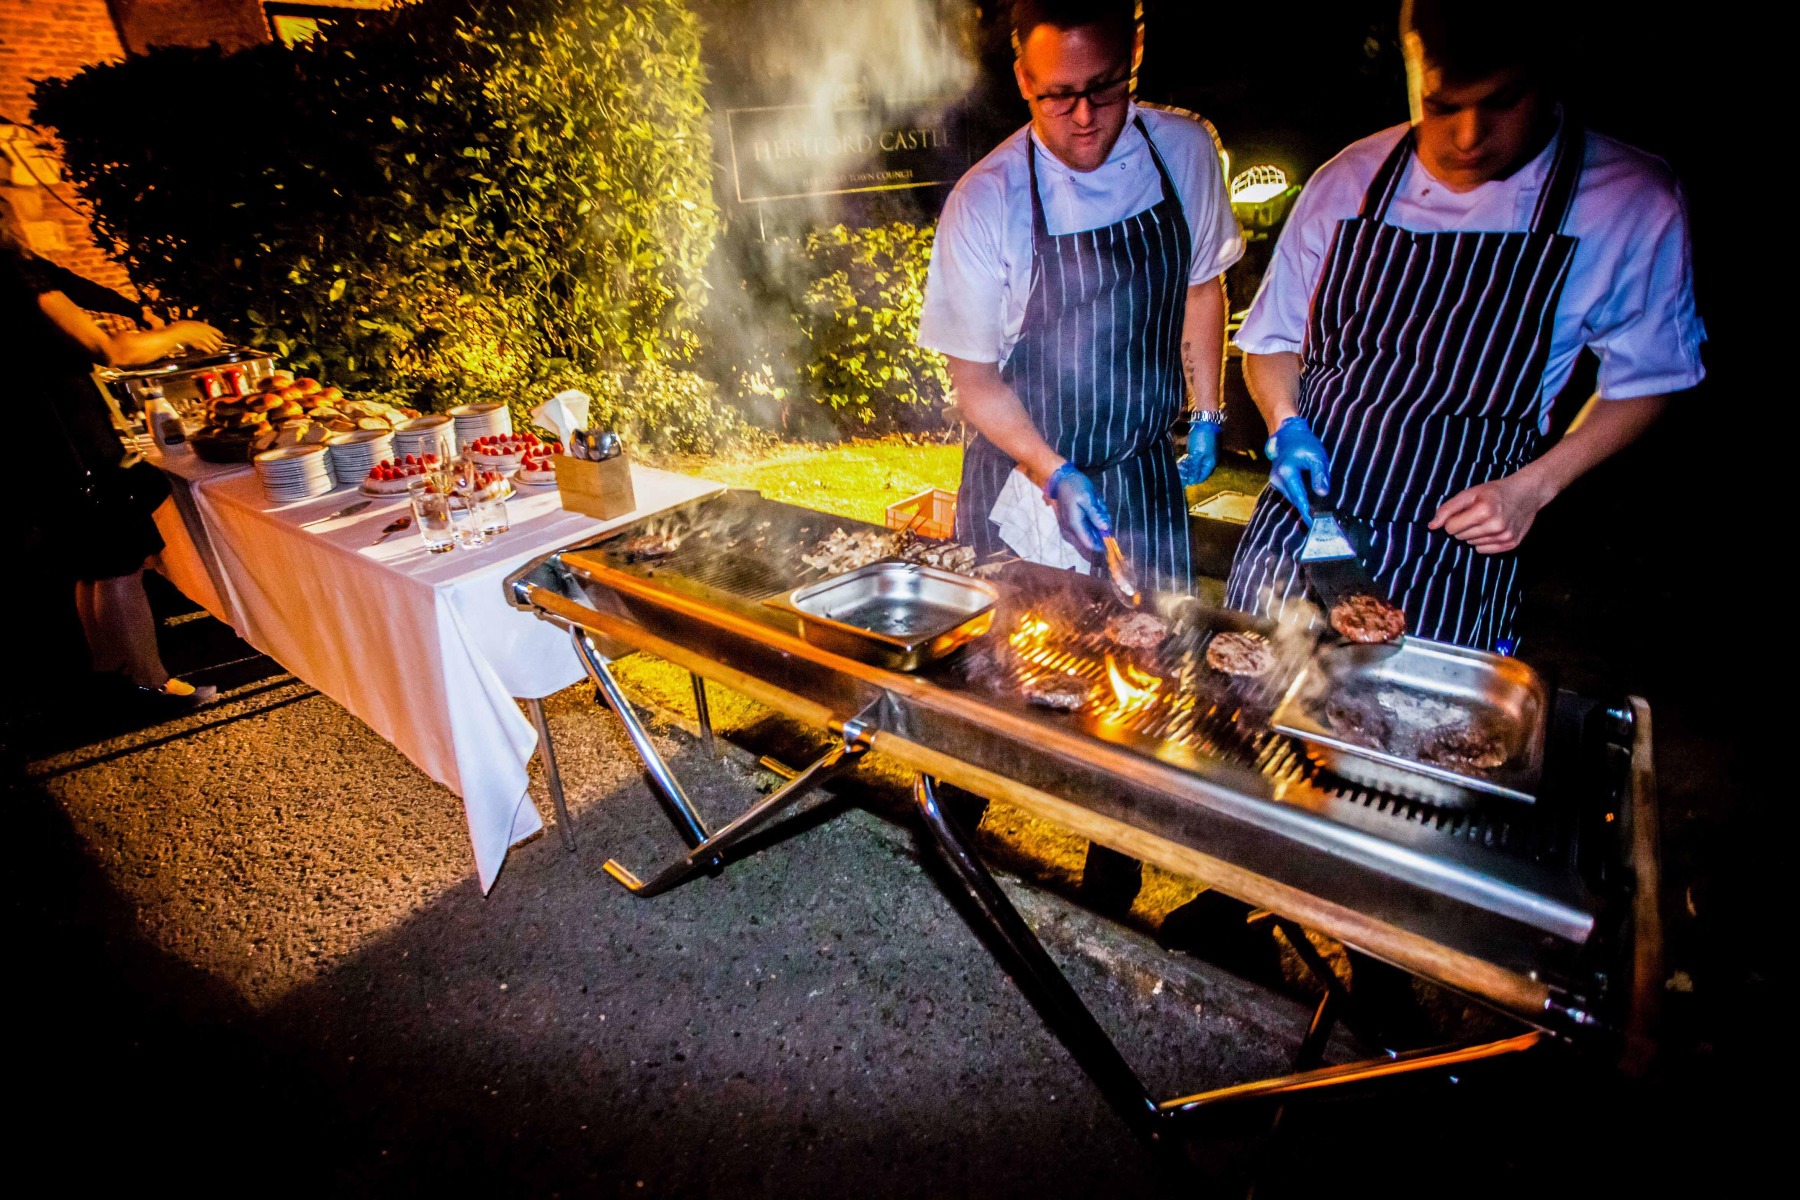 A close up of caterers cooking over an open flamed BBQ at night